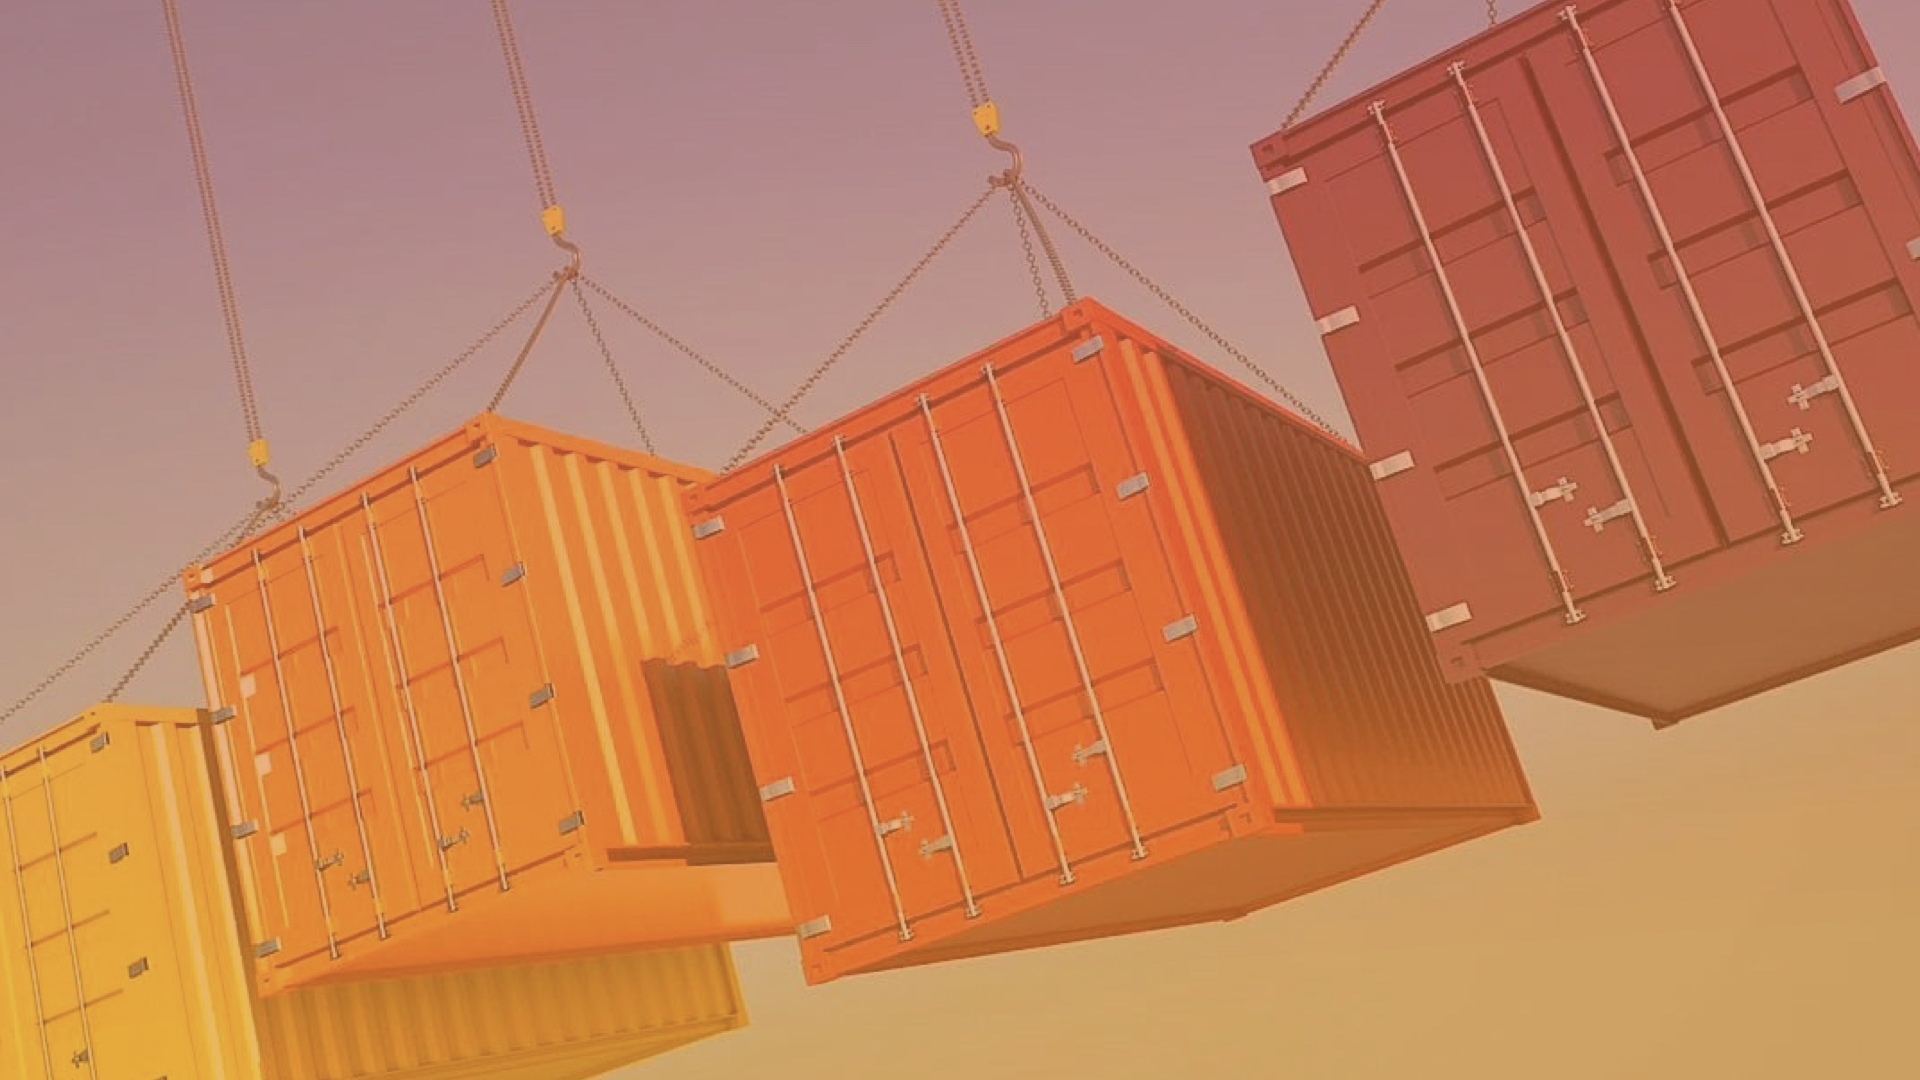 A Brief History of Containerization